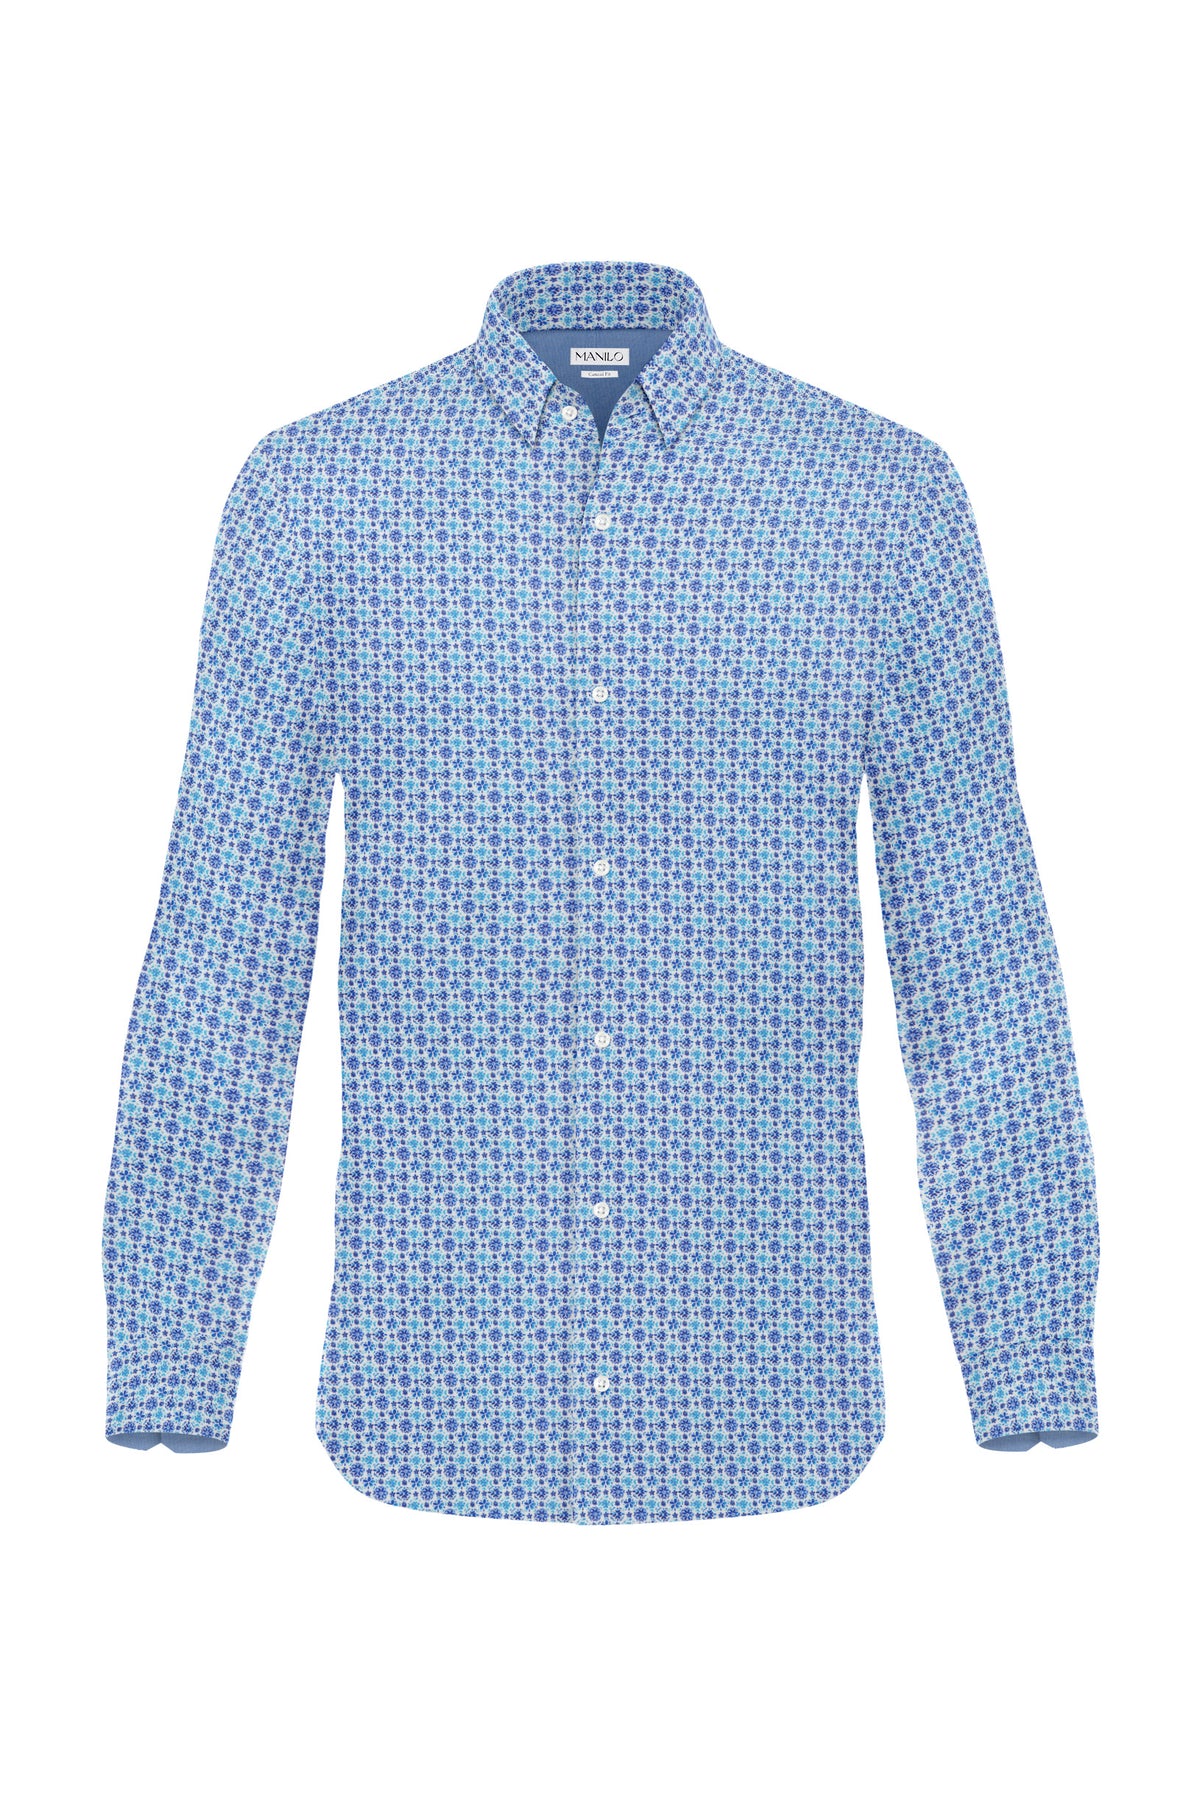 Casual shirt with floral pattern in blue (Art. 2214-C)